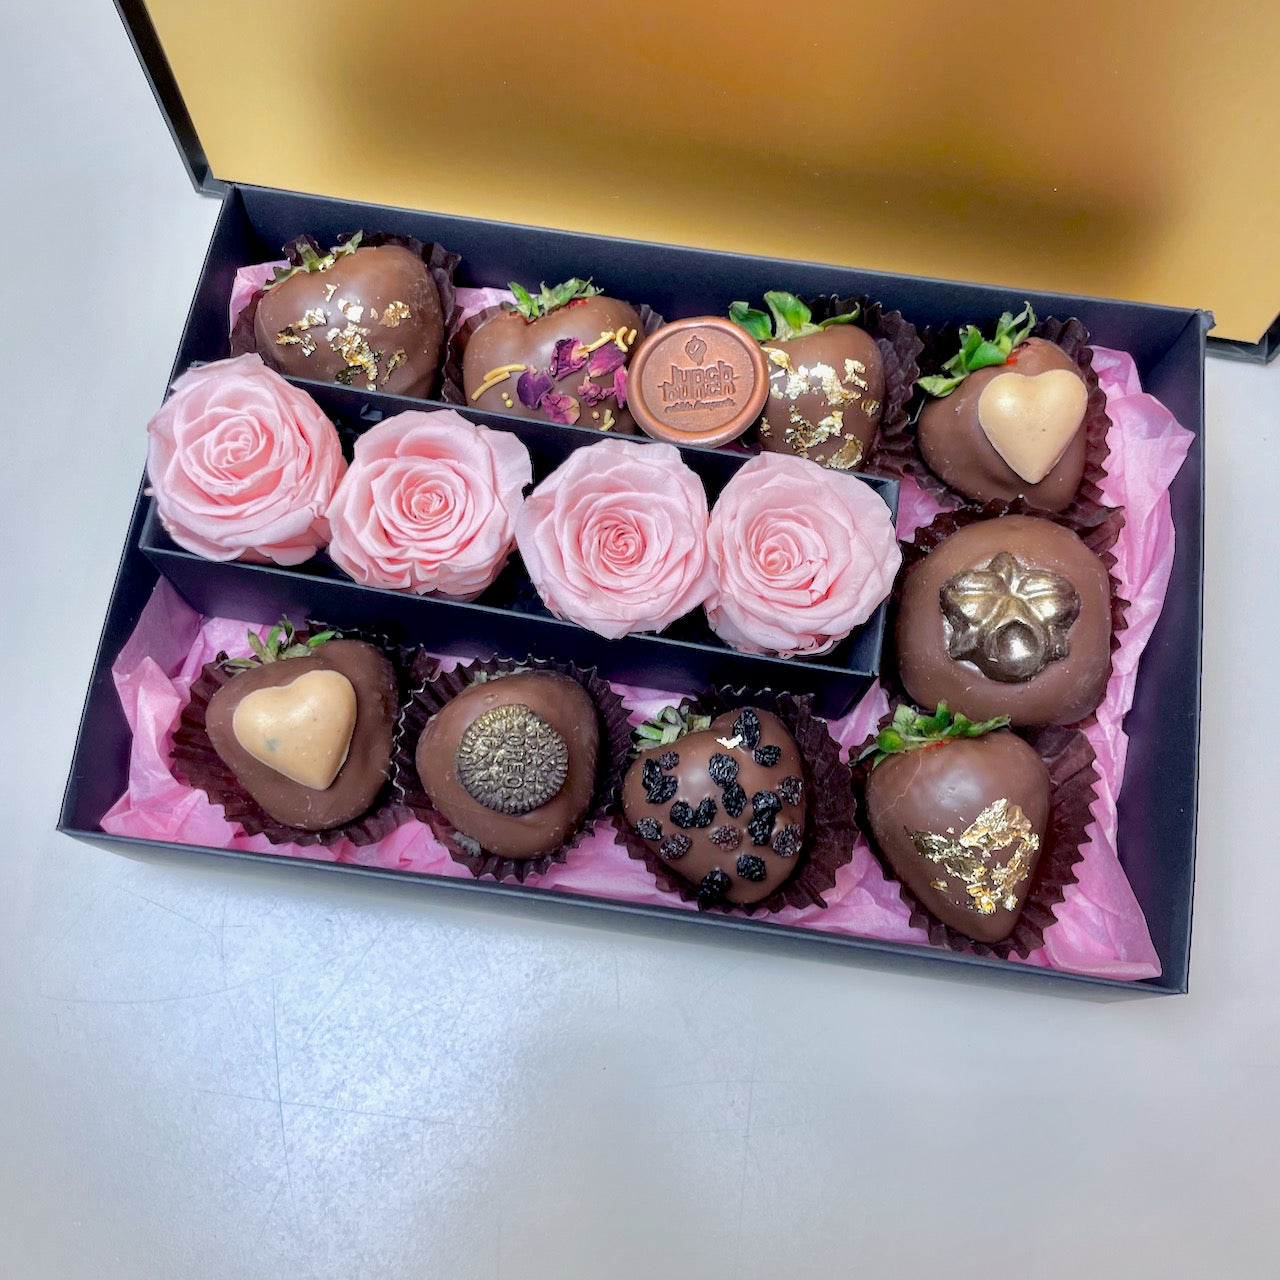 preserved Roses, Infinity Roses, Eternal Roses, Chocolate Strawberries Box, K1 Sparkling, Same day Delivery Gift Hamper, Chocolate Flowers Gift, Valentine's Day Chocolate box, Valentine Gift for Her, Long lasting flowers.